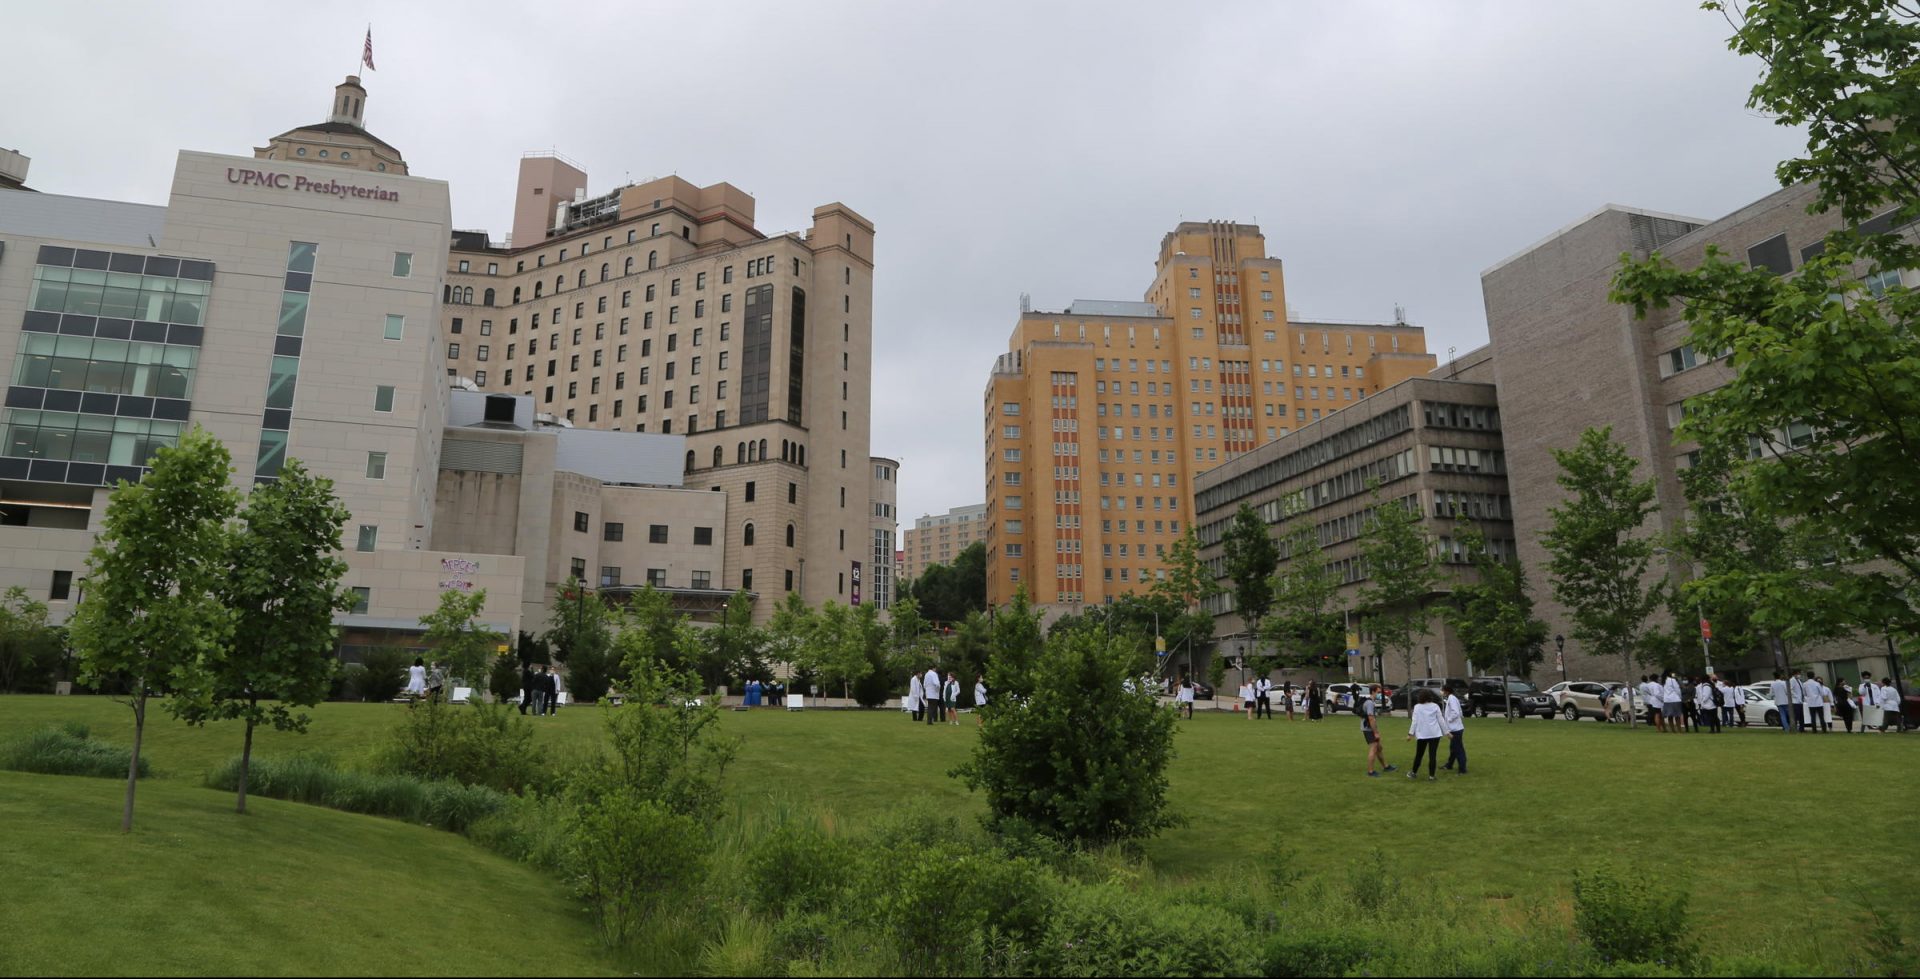 Health care workers socialize on the lawn outside UPMC Presbyterian Hospital in Pittsburgh.